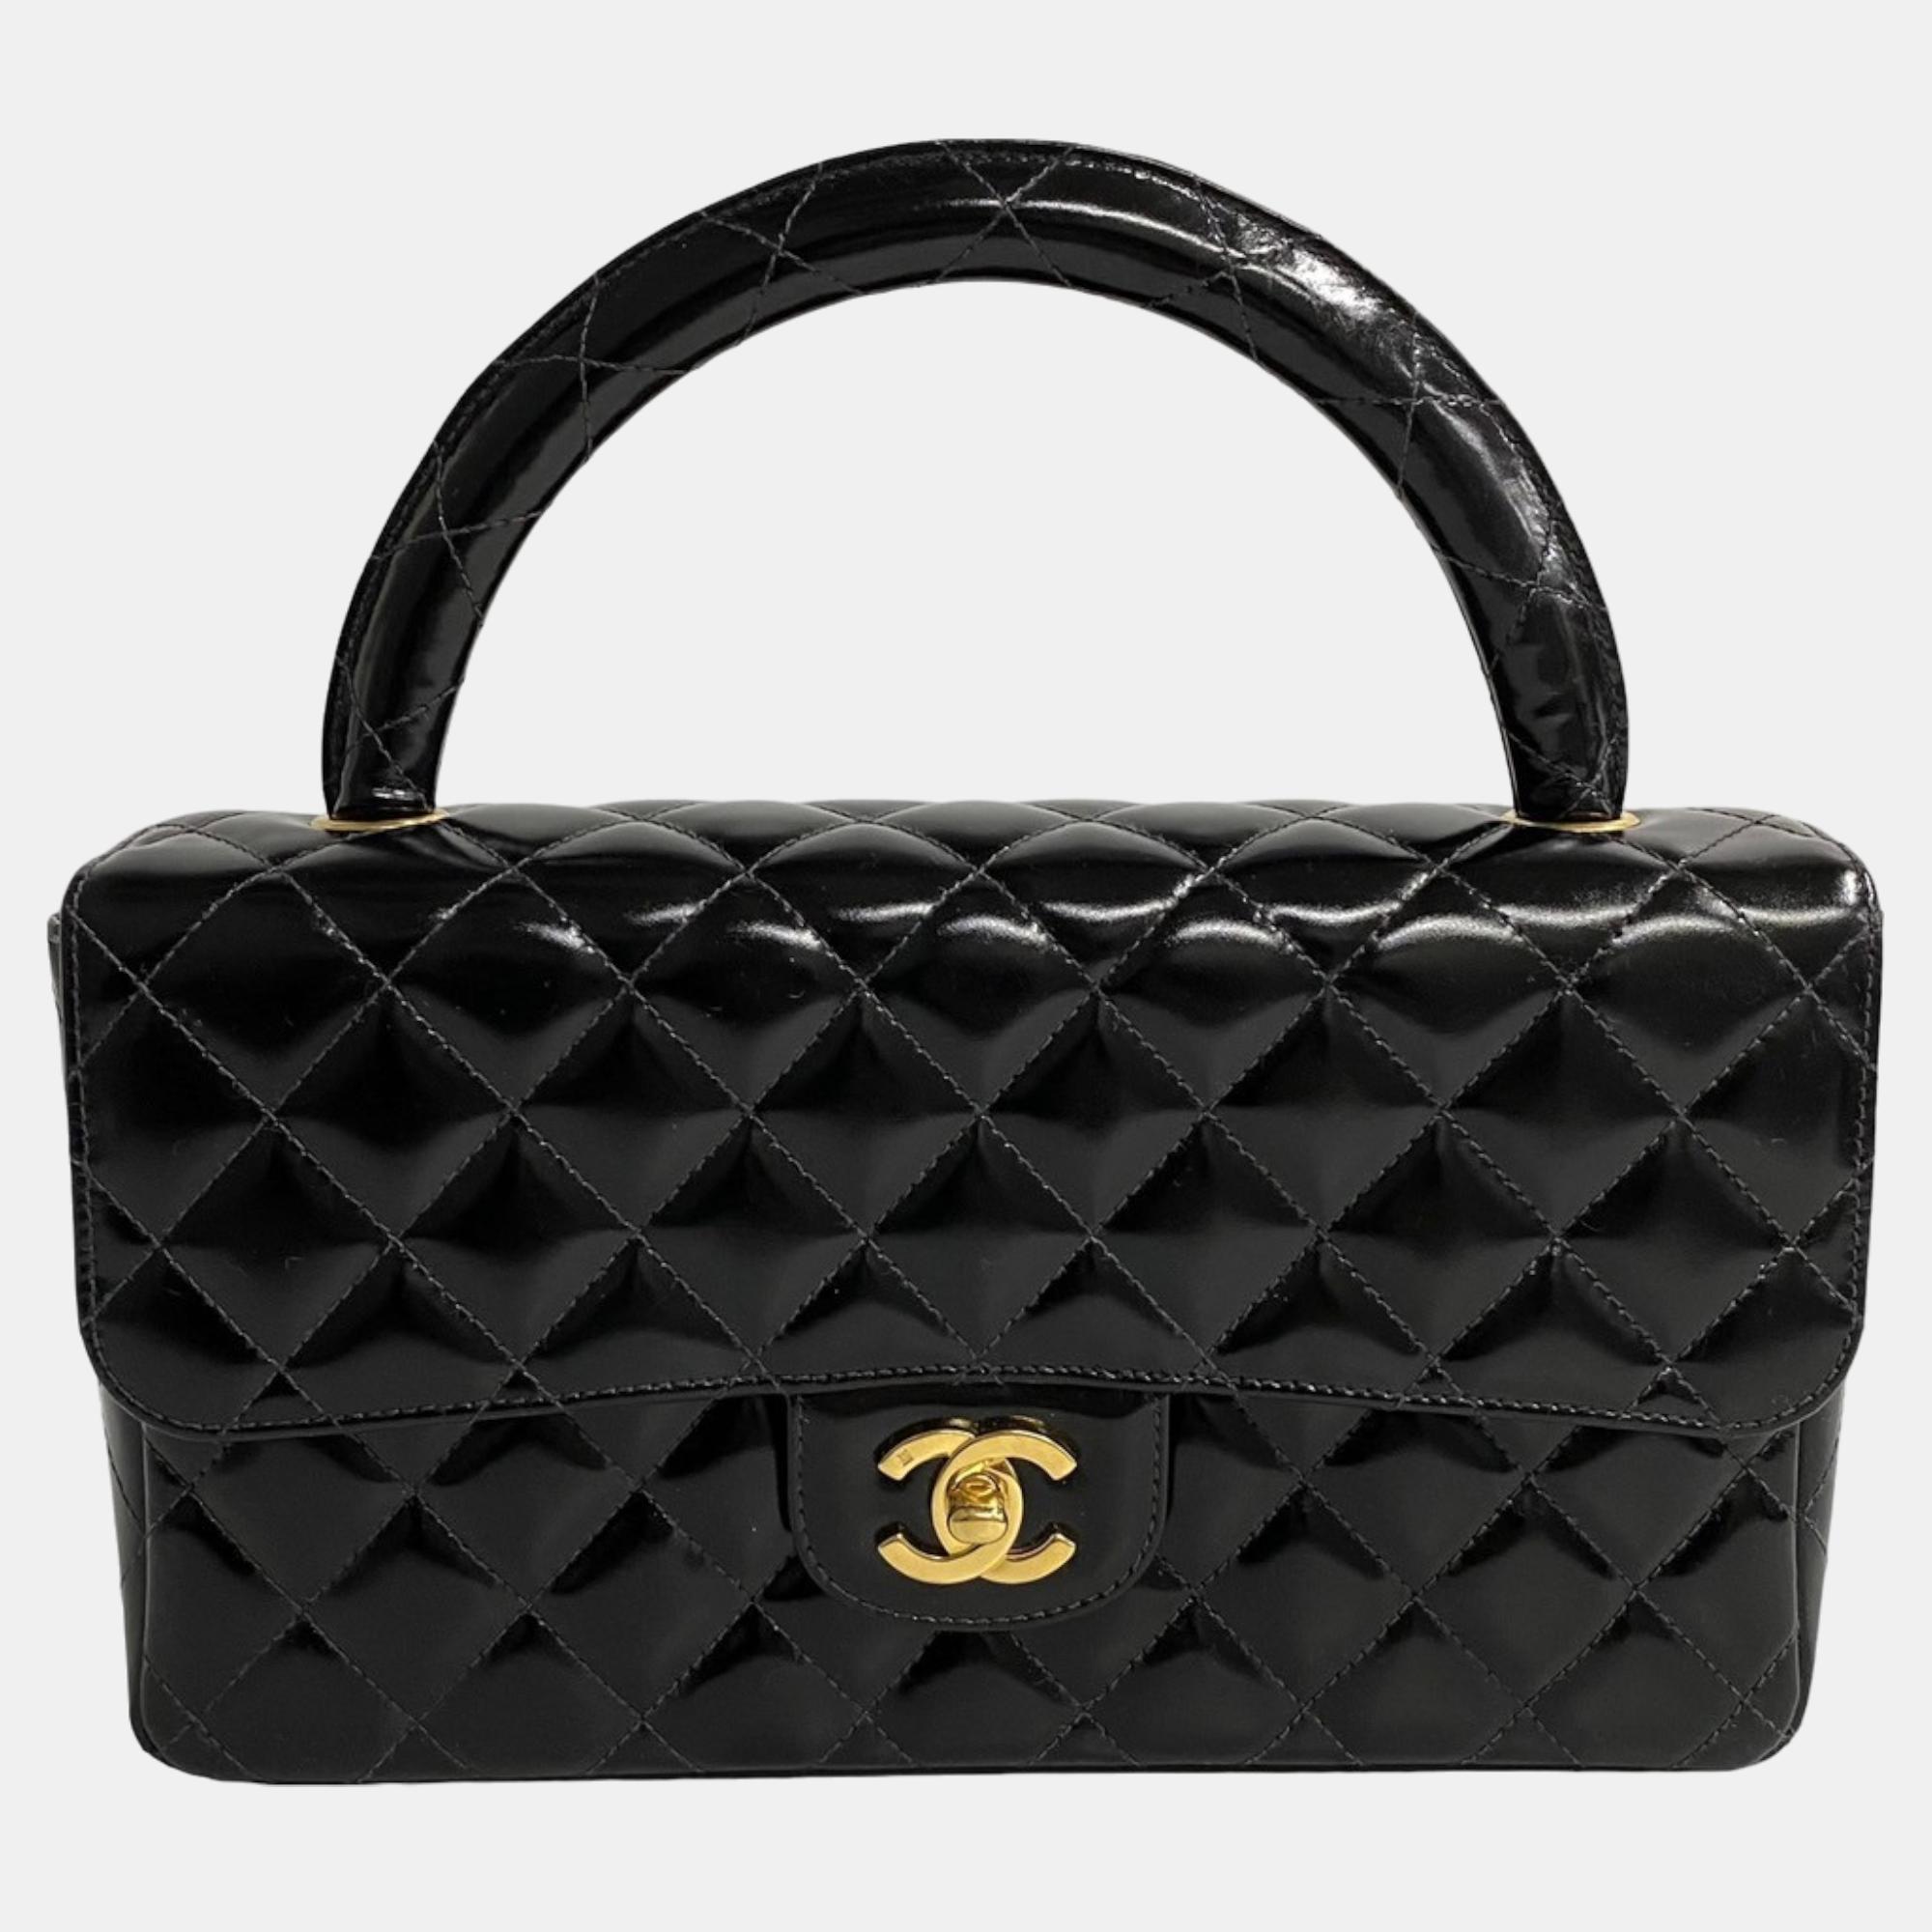 Chanel black patent leather kelly top handle bag